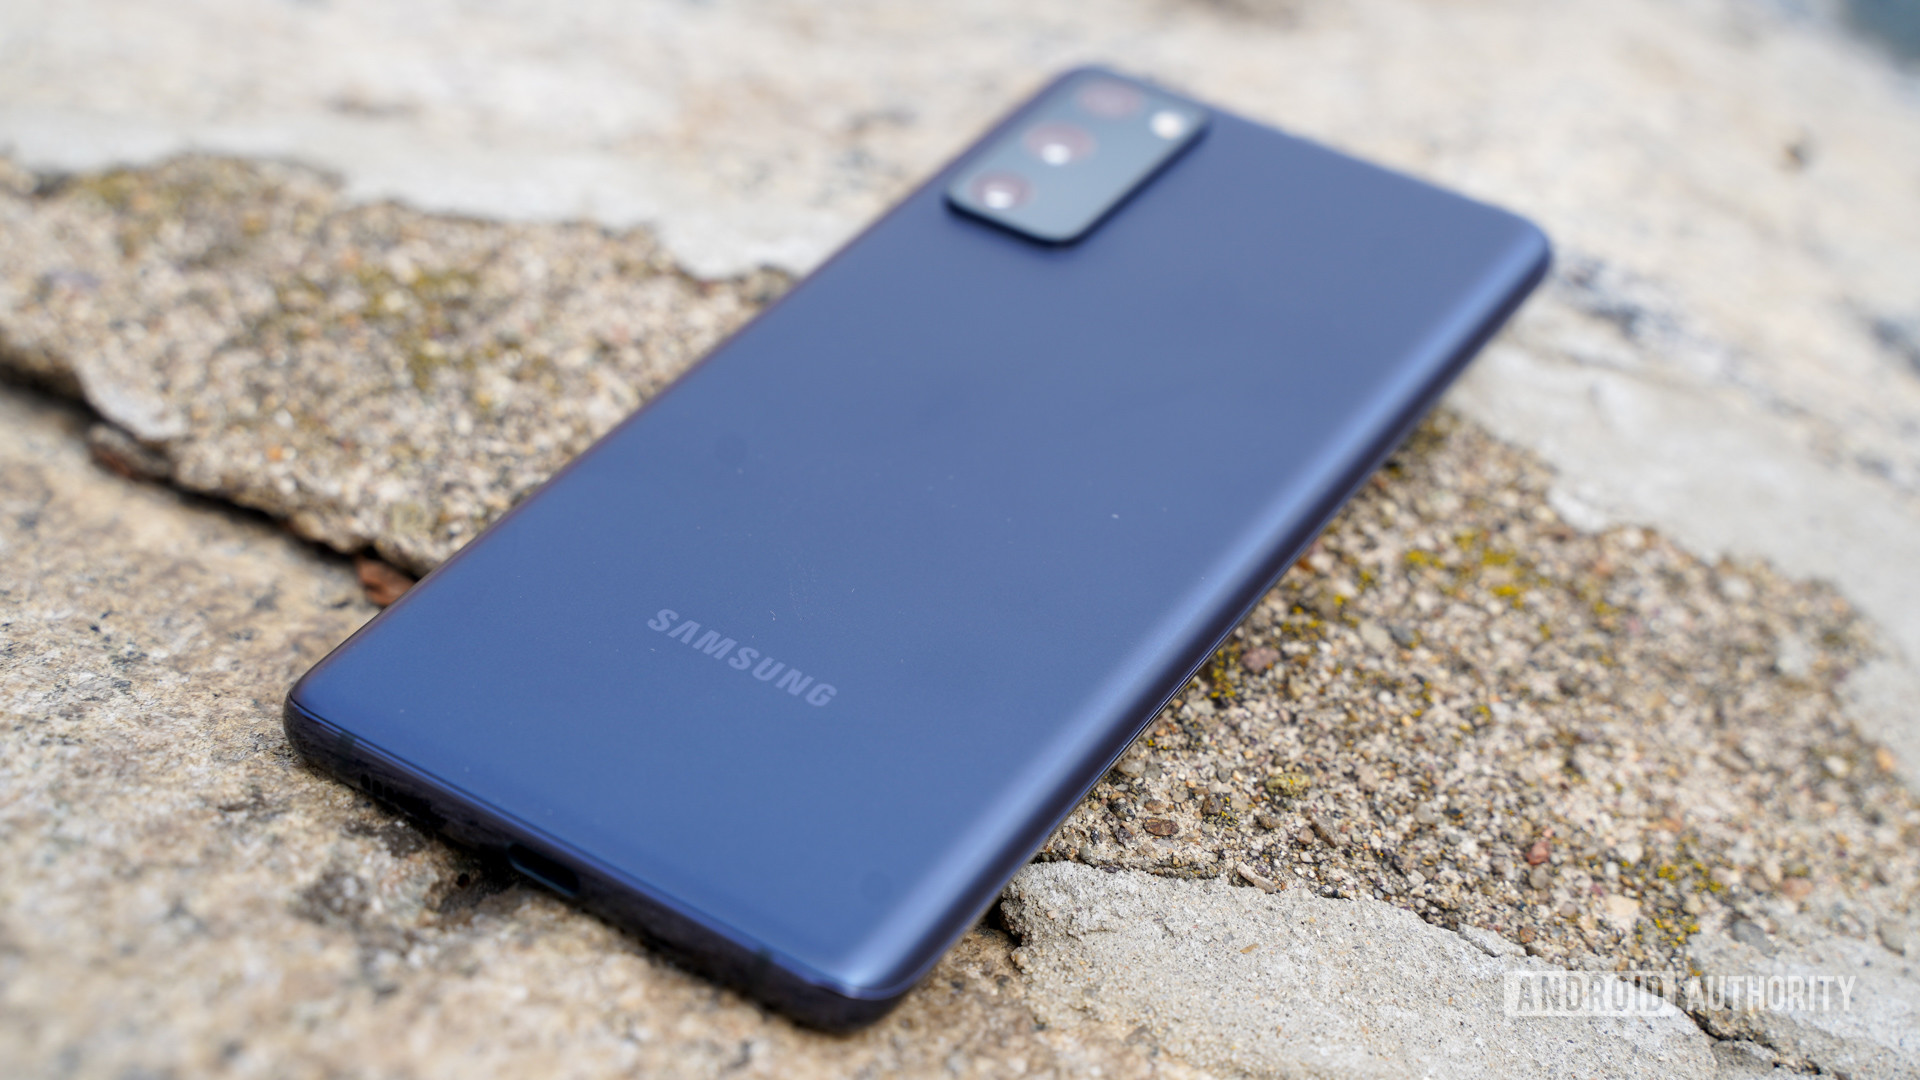 Samsung Galaxy S20 FE review: A solid budget buy